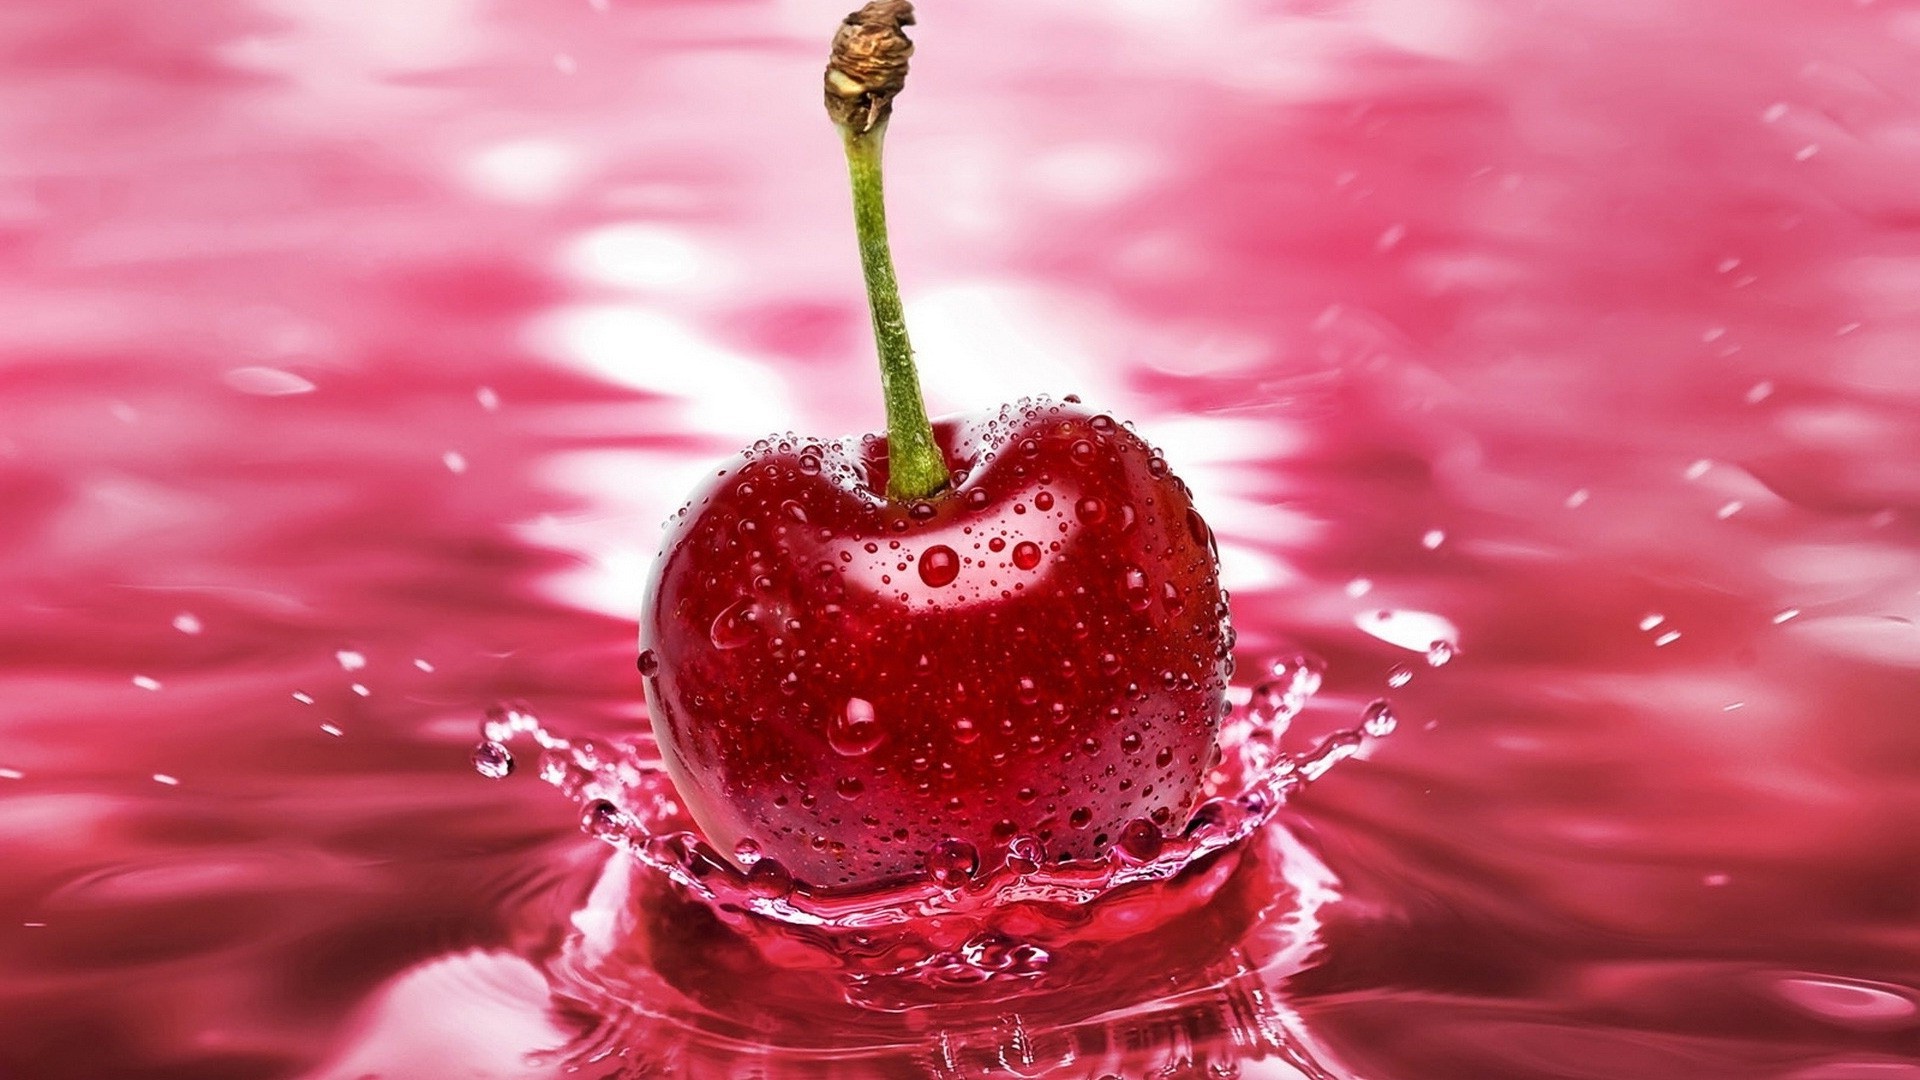 Red Cherry Hd Wallpapers